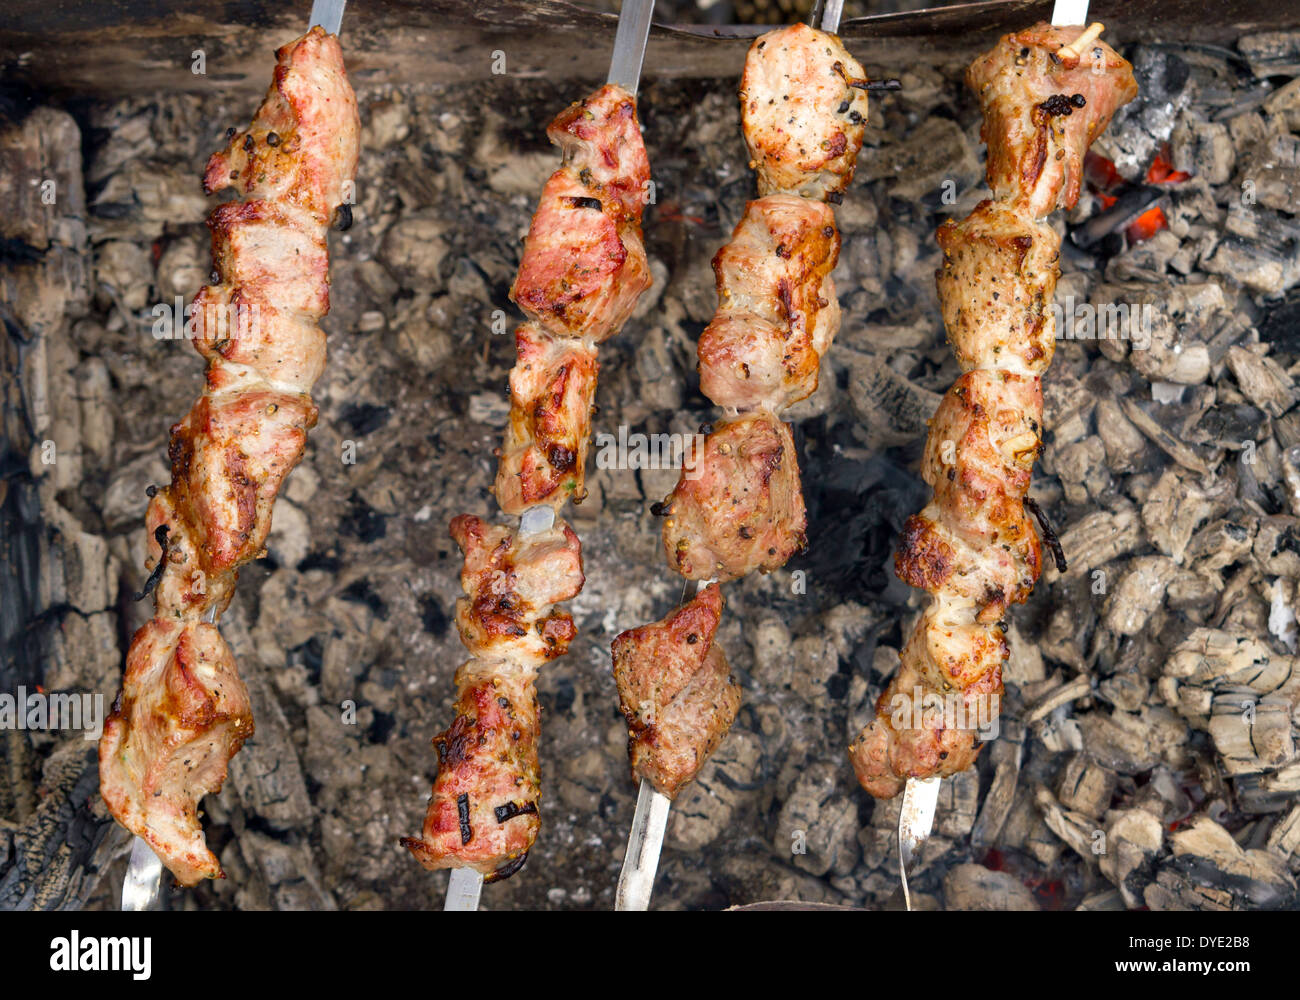 Barbecue tasty food pork on ashes outdoors Stock Photo